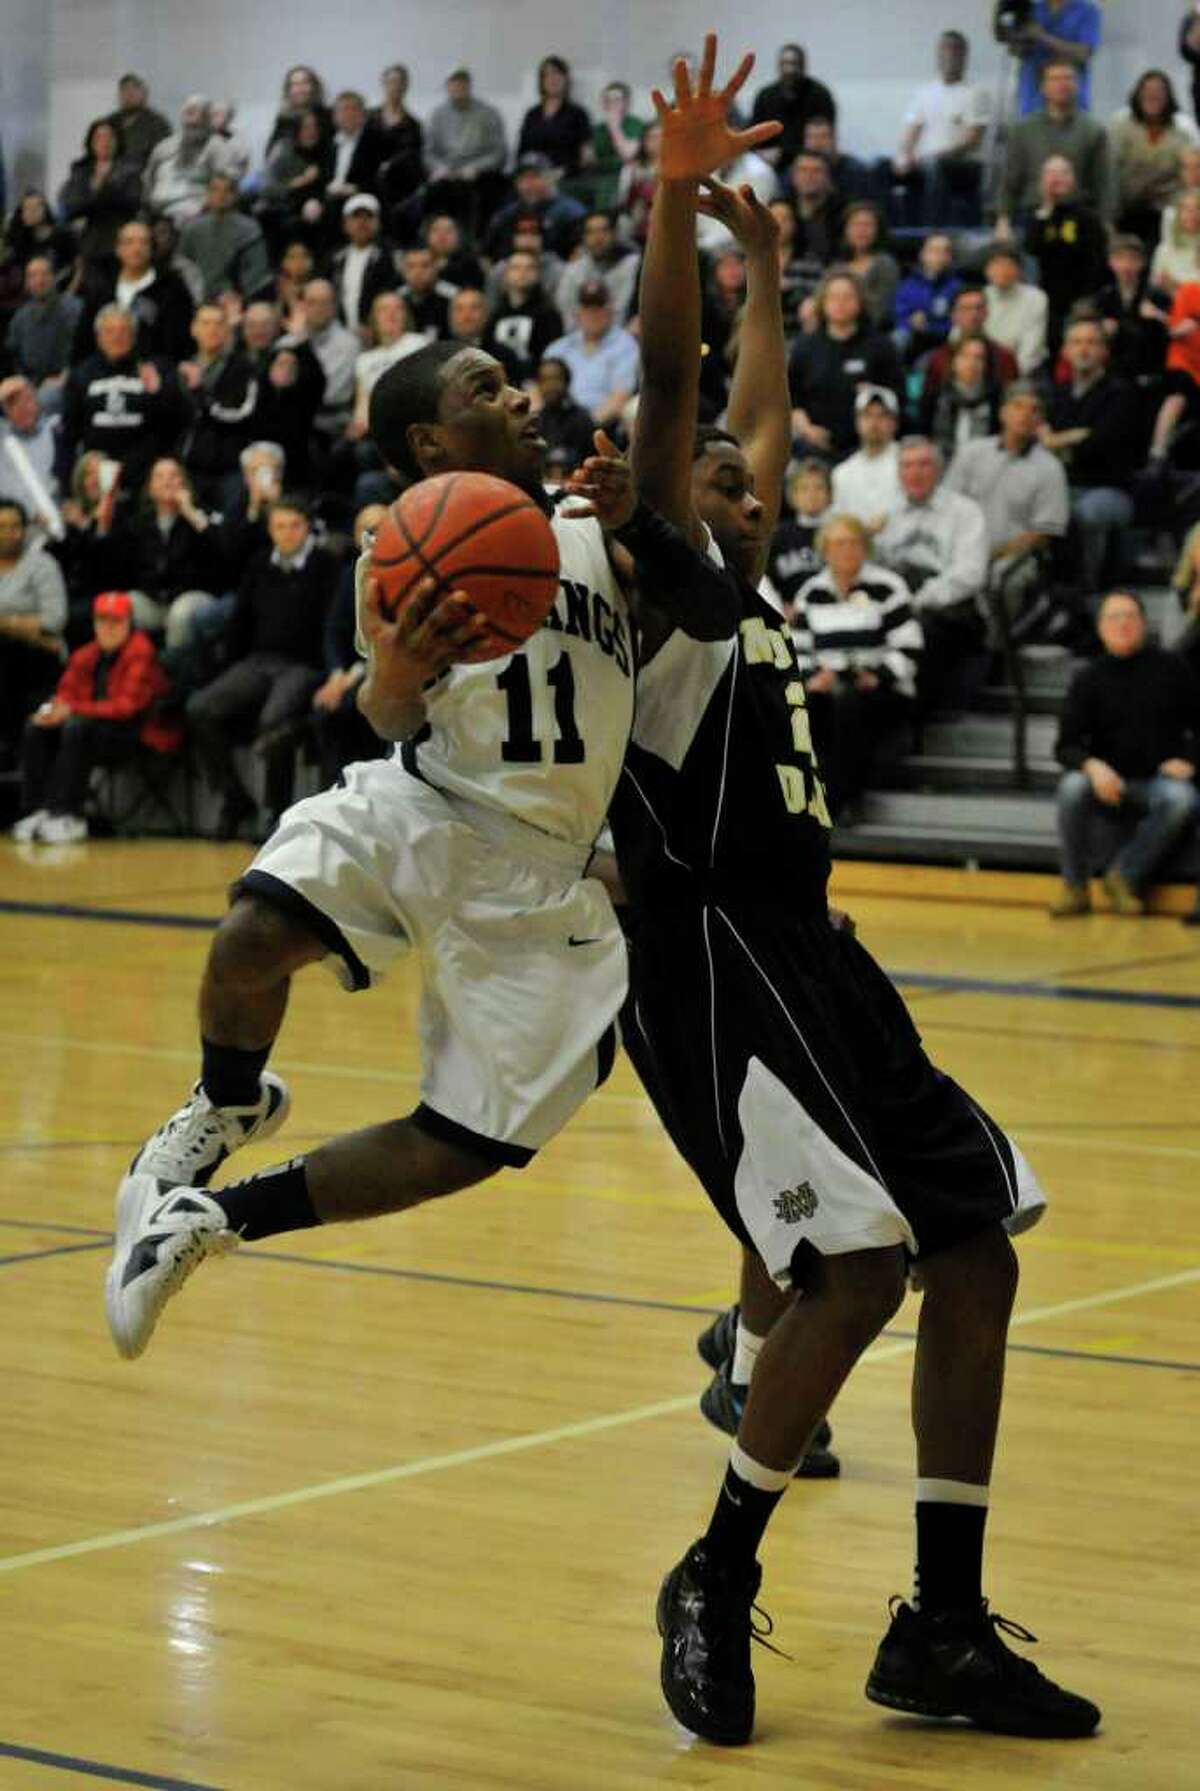 Immaculate's Daniel McCorkle shoots while under pressure from Notre Dame Fairfield's Jaylen Jennings during their SWC championship game at Weston High School on Thursday, March 1, 2012. Immaculate won 64-53.